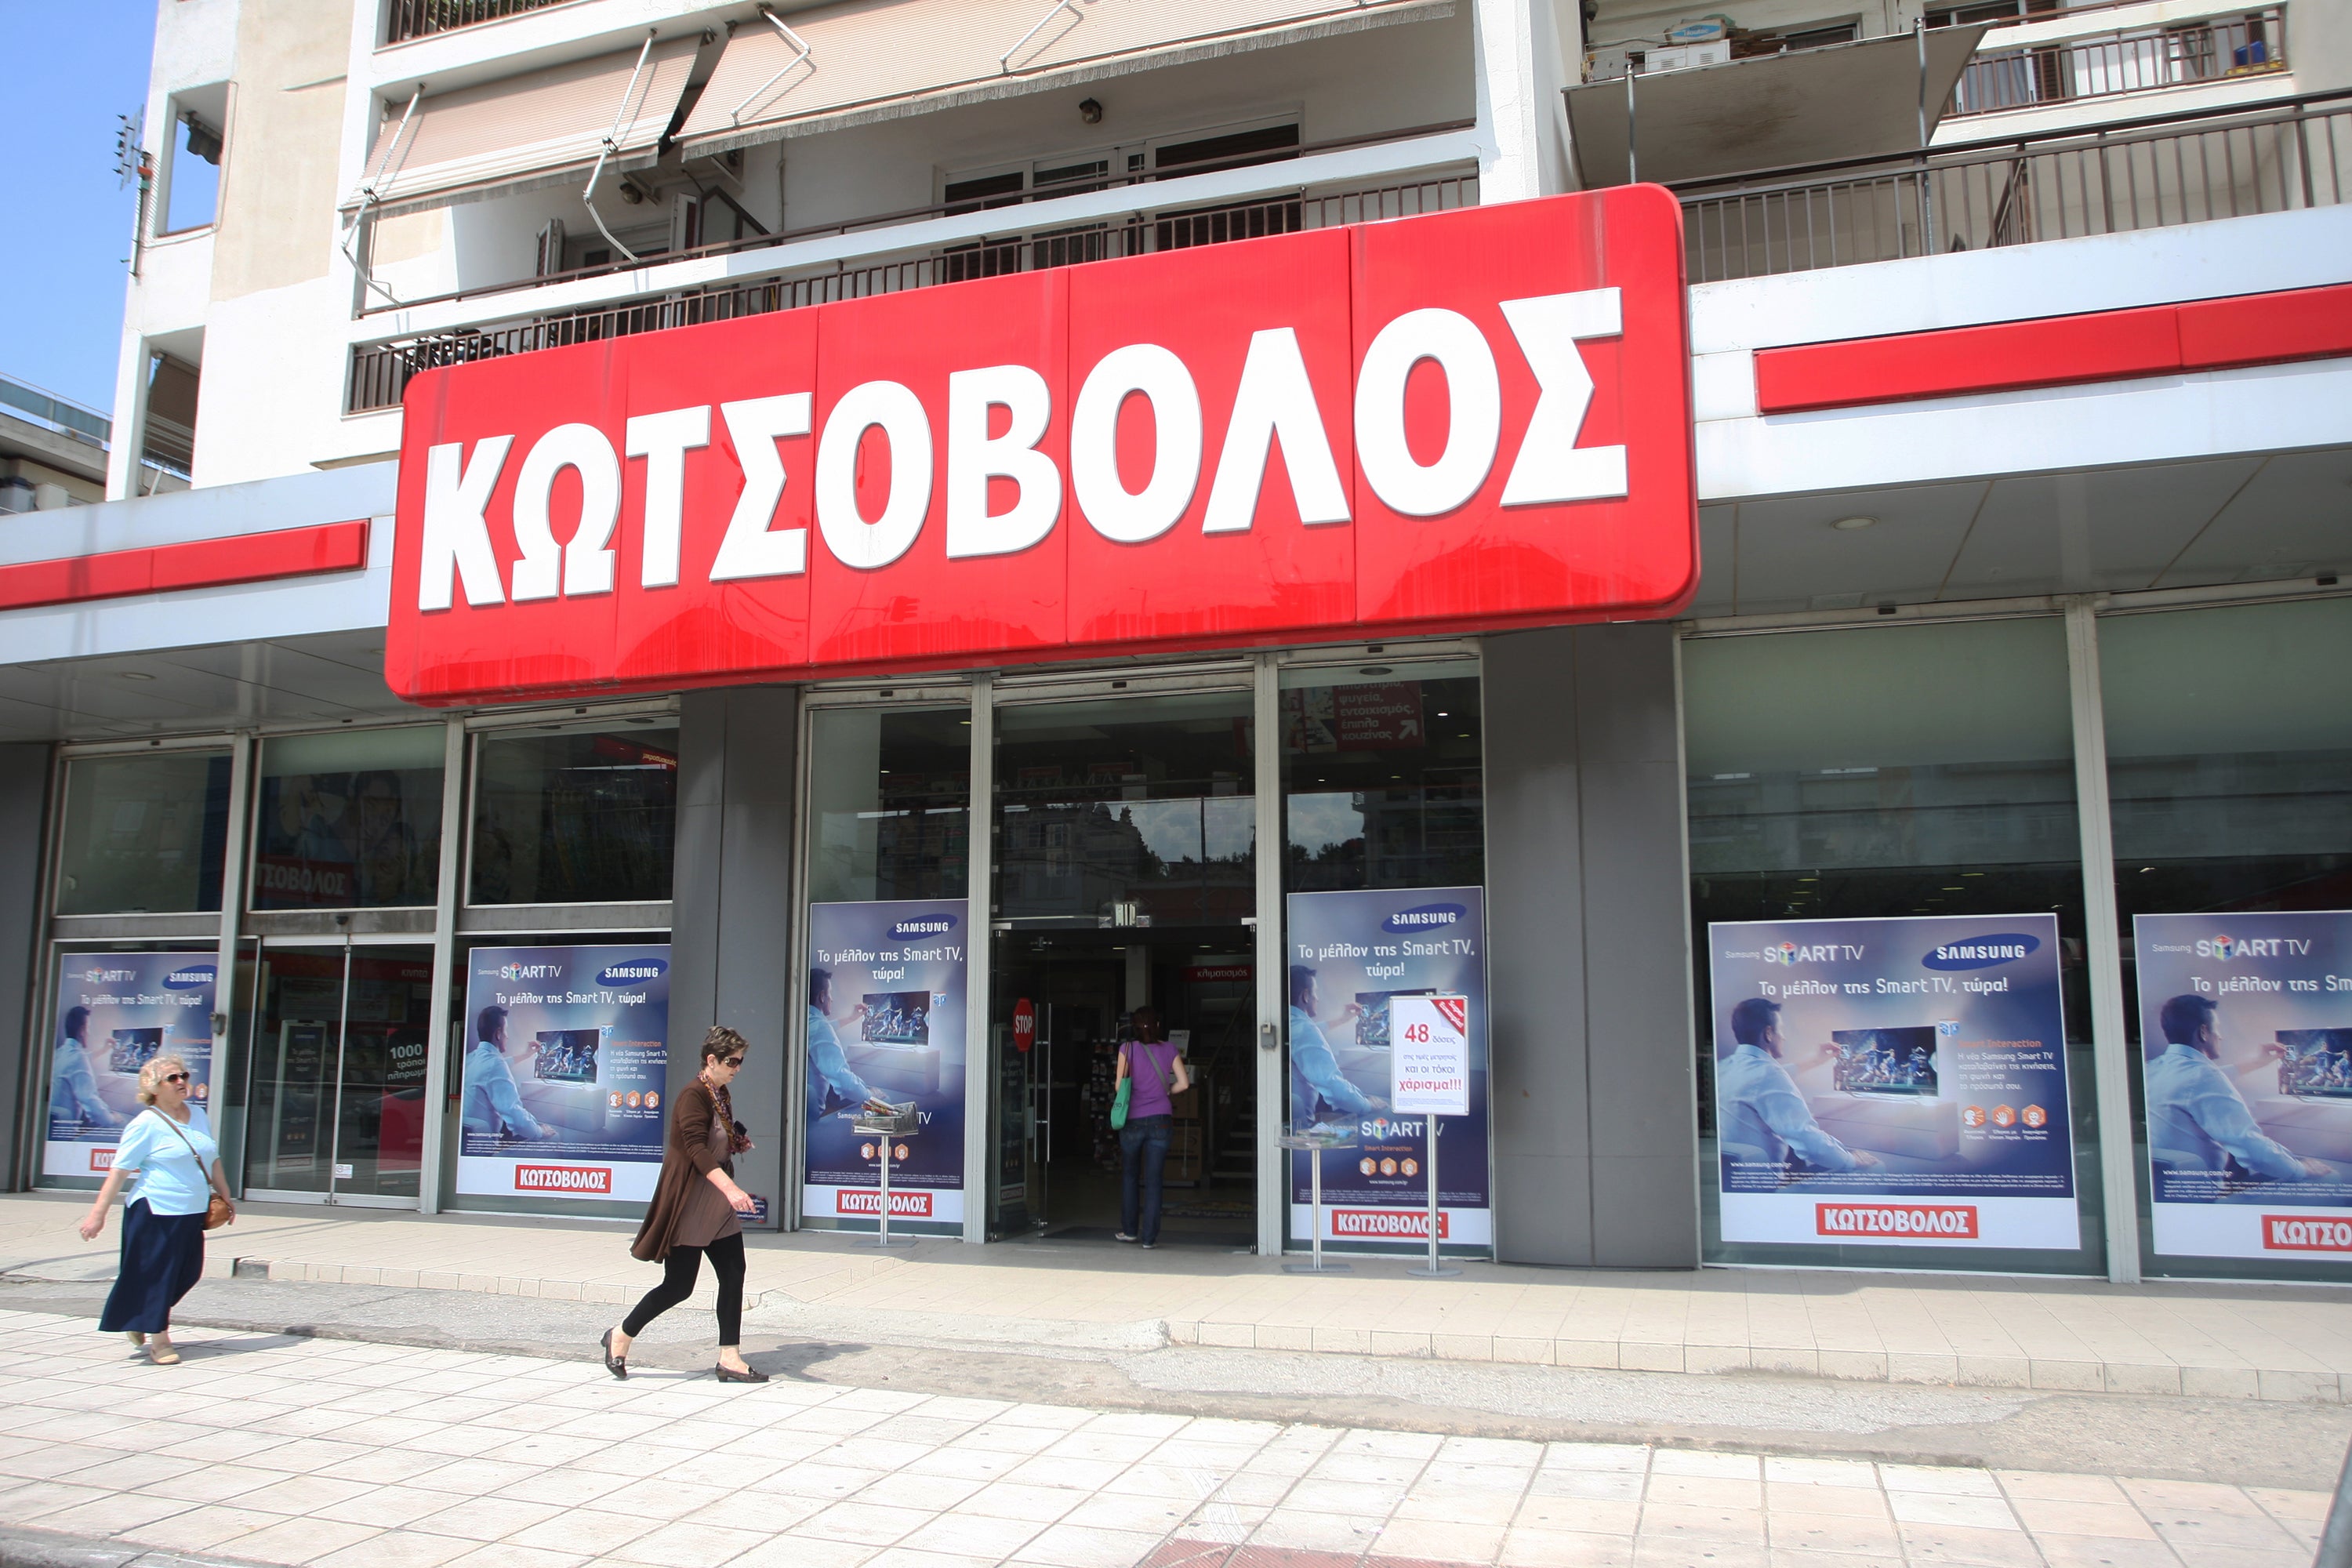 Dixons' Kotsovolos brand is the market leader in Greece